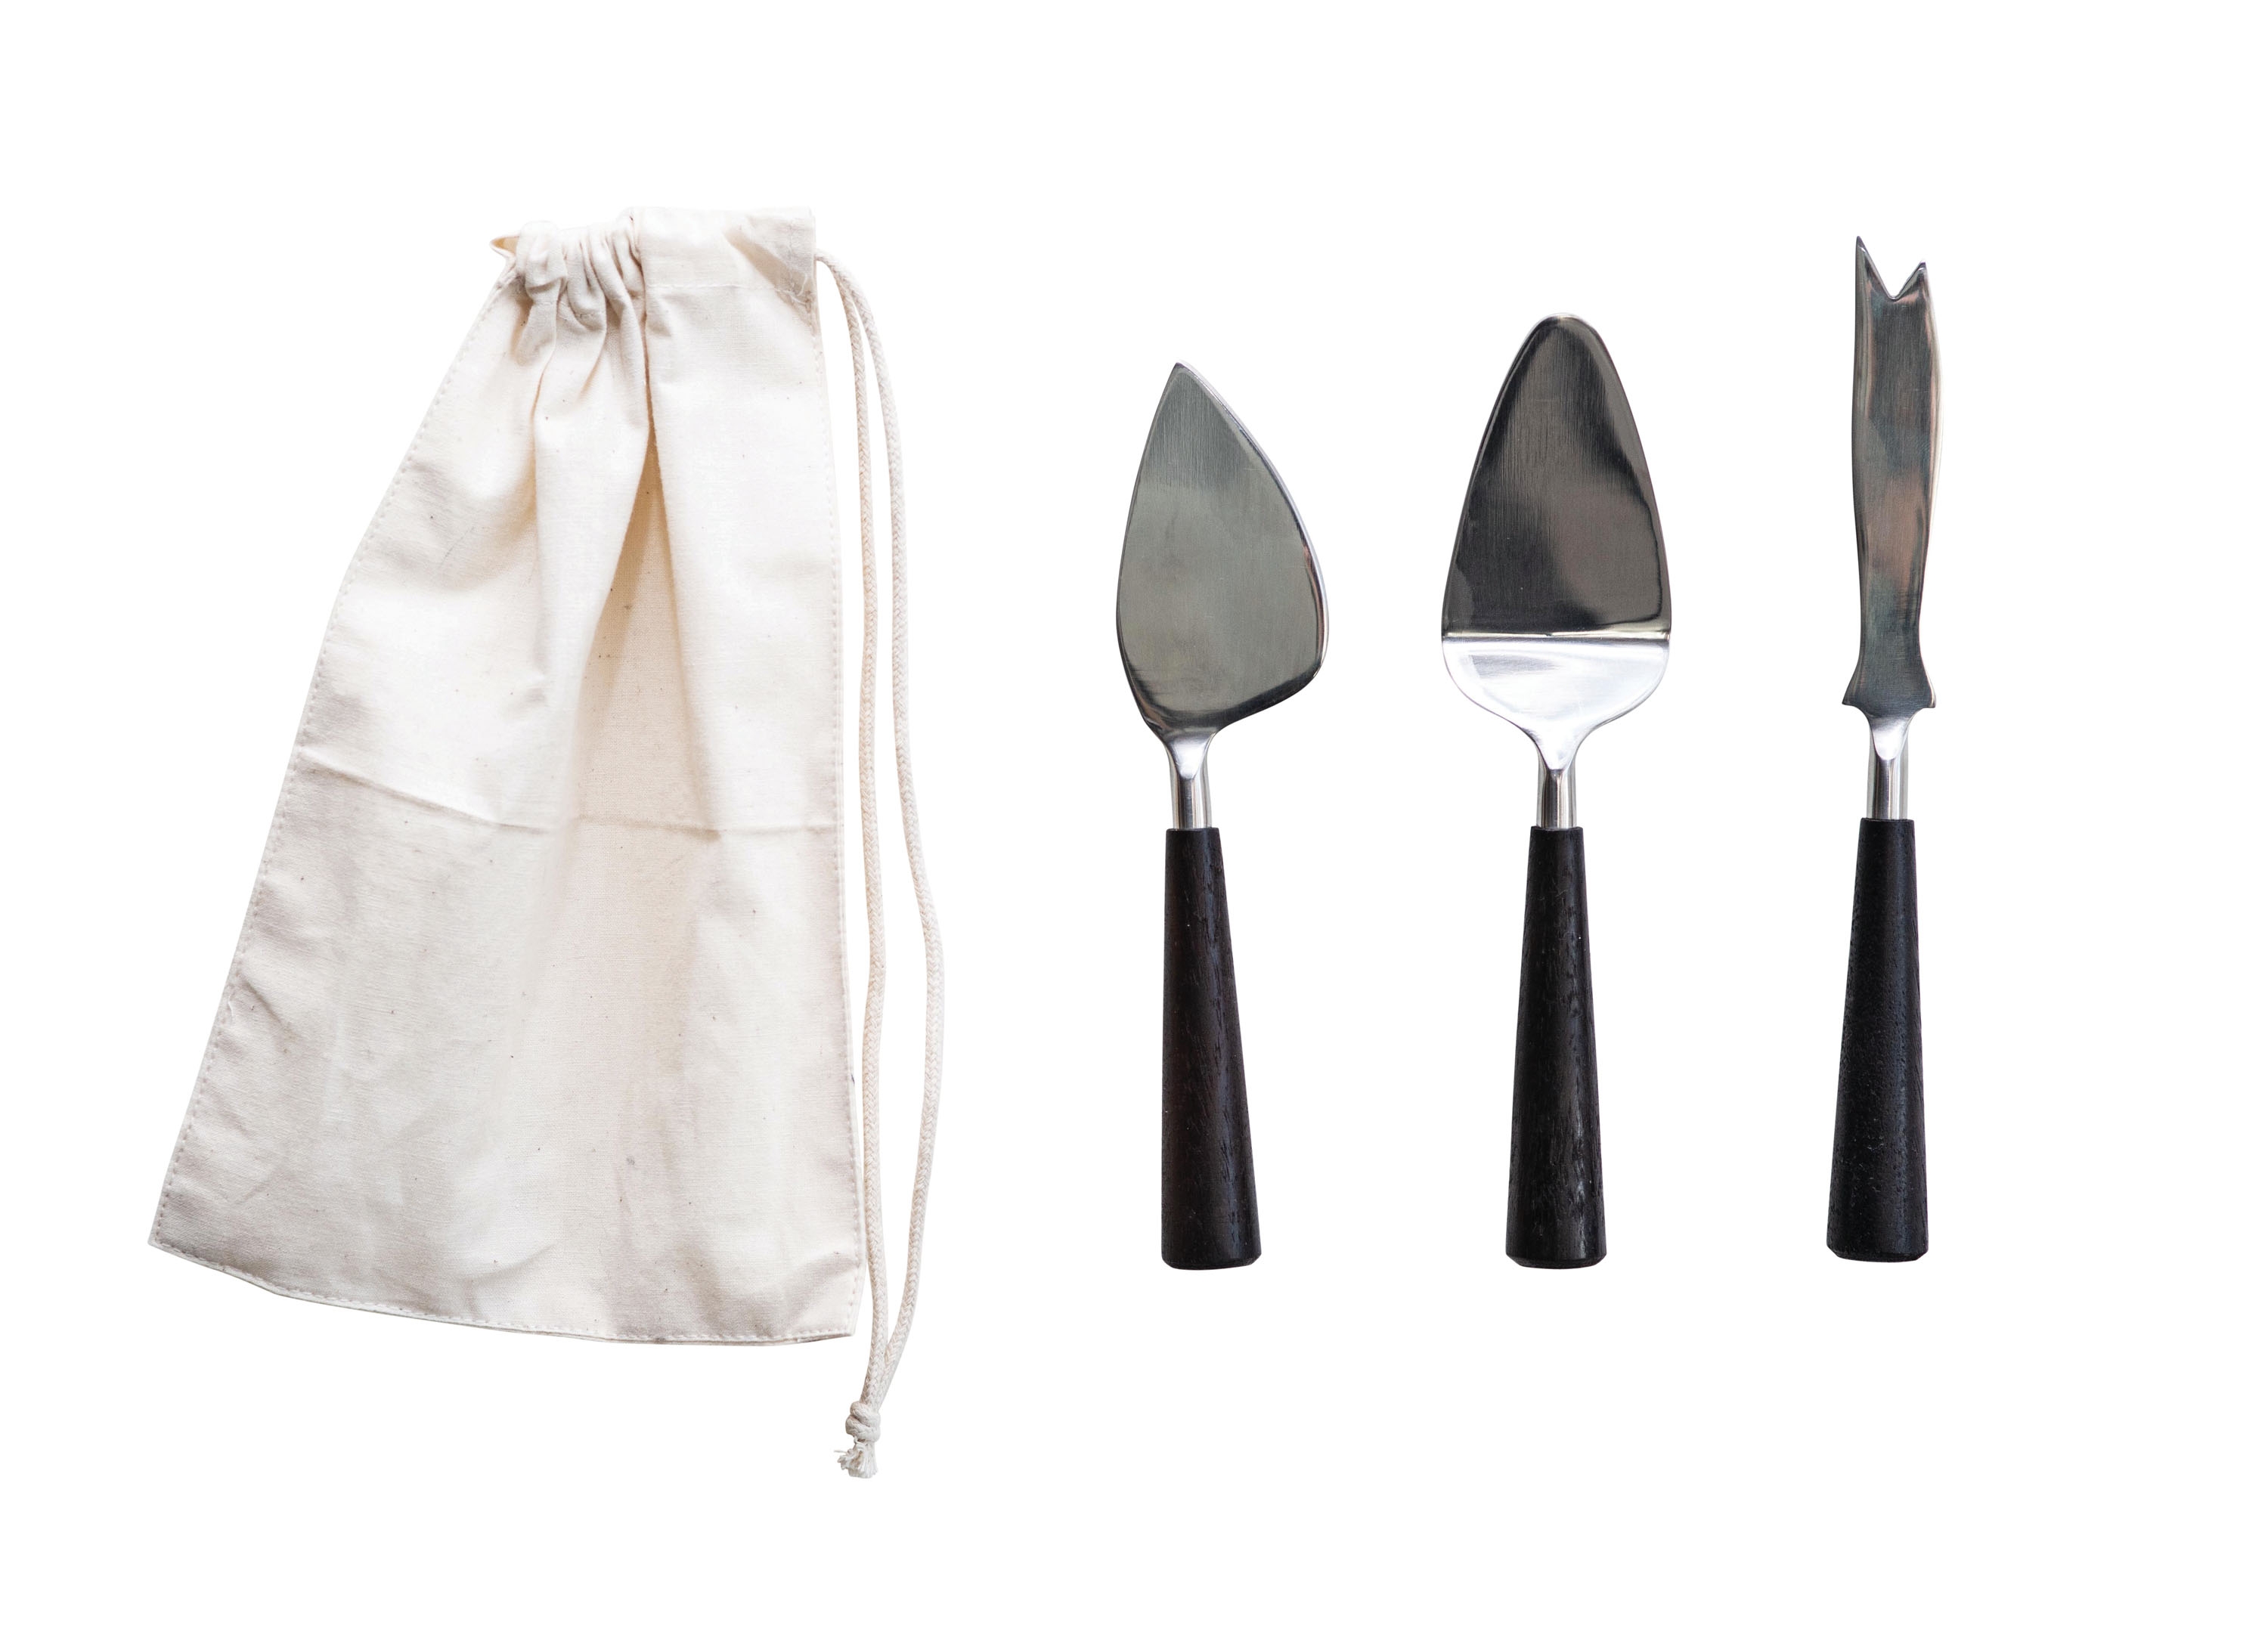 Silver Stainless Steel Cheese Utensils with Black Wood Handles (Set of 3 in Drawstring Bag) - Image 0